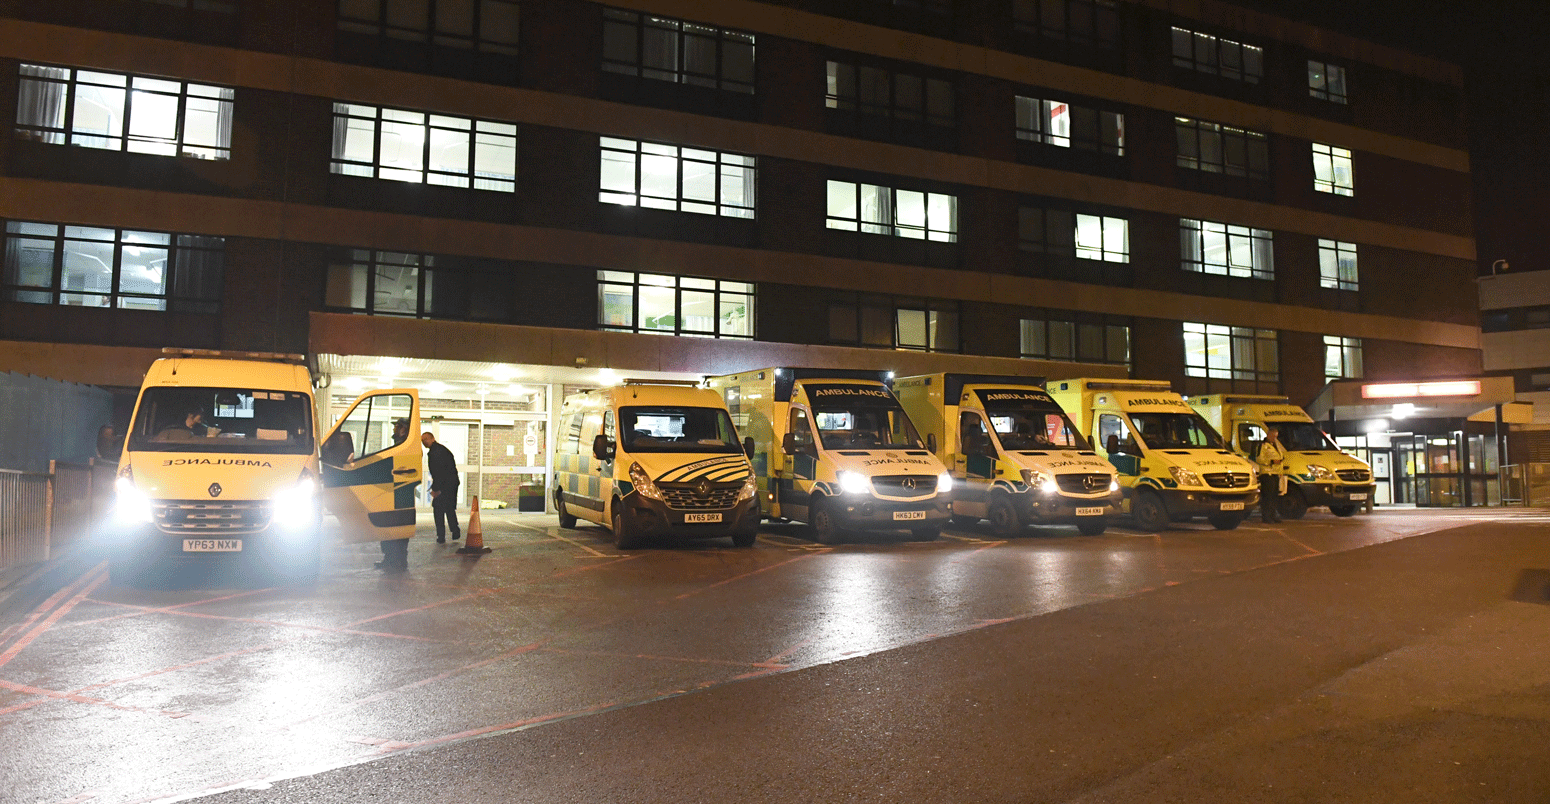 Queue of ambulances at the accident and emergency department at Queen Alexandra Hospital in Portsmouth, Hampshire